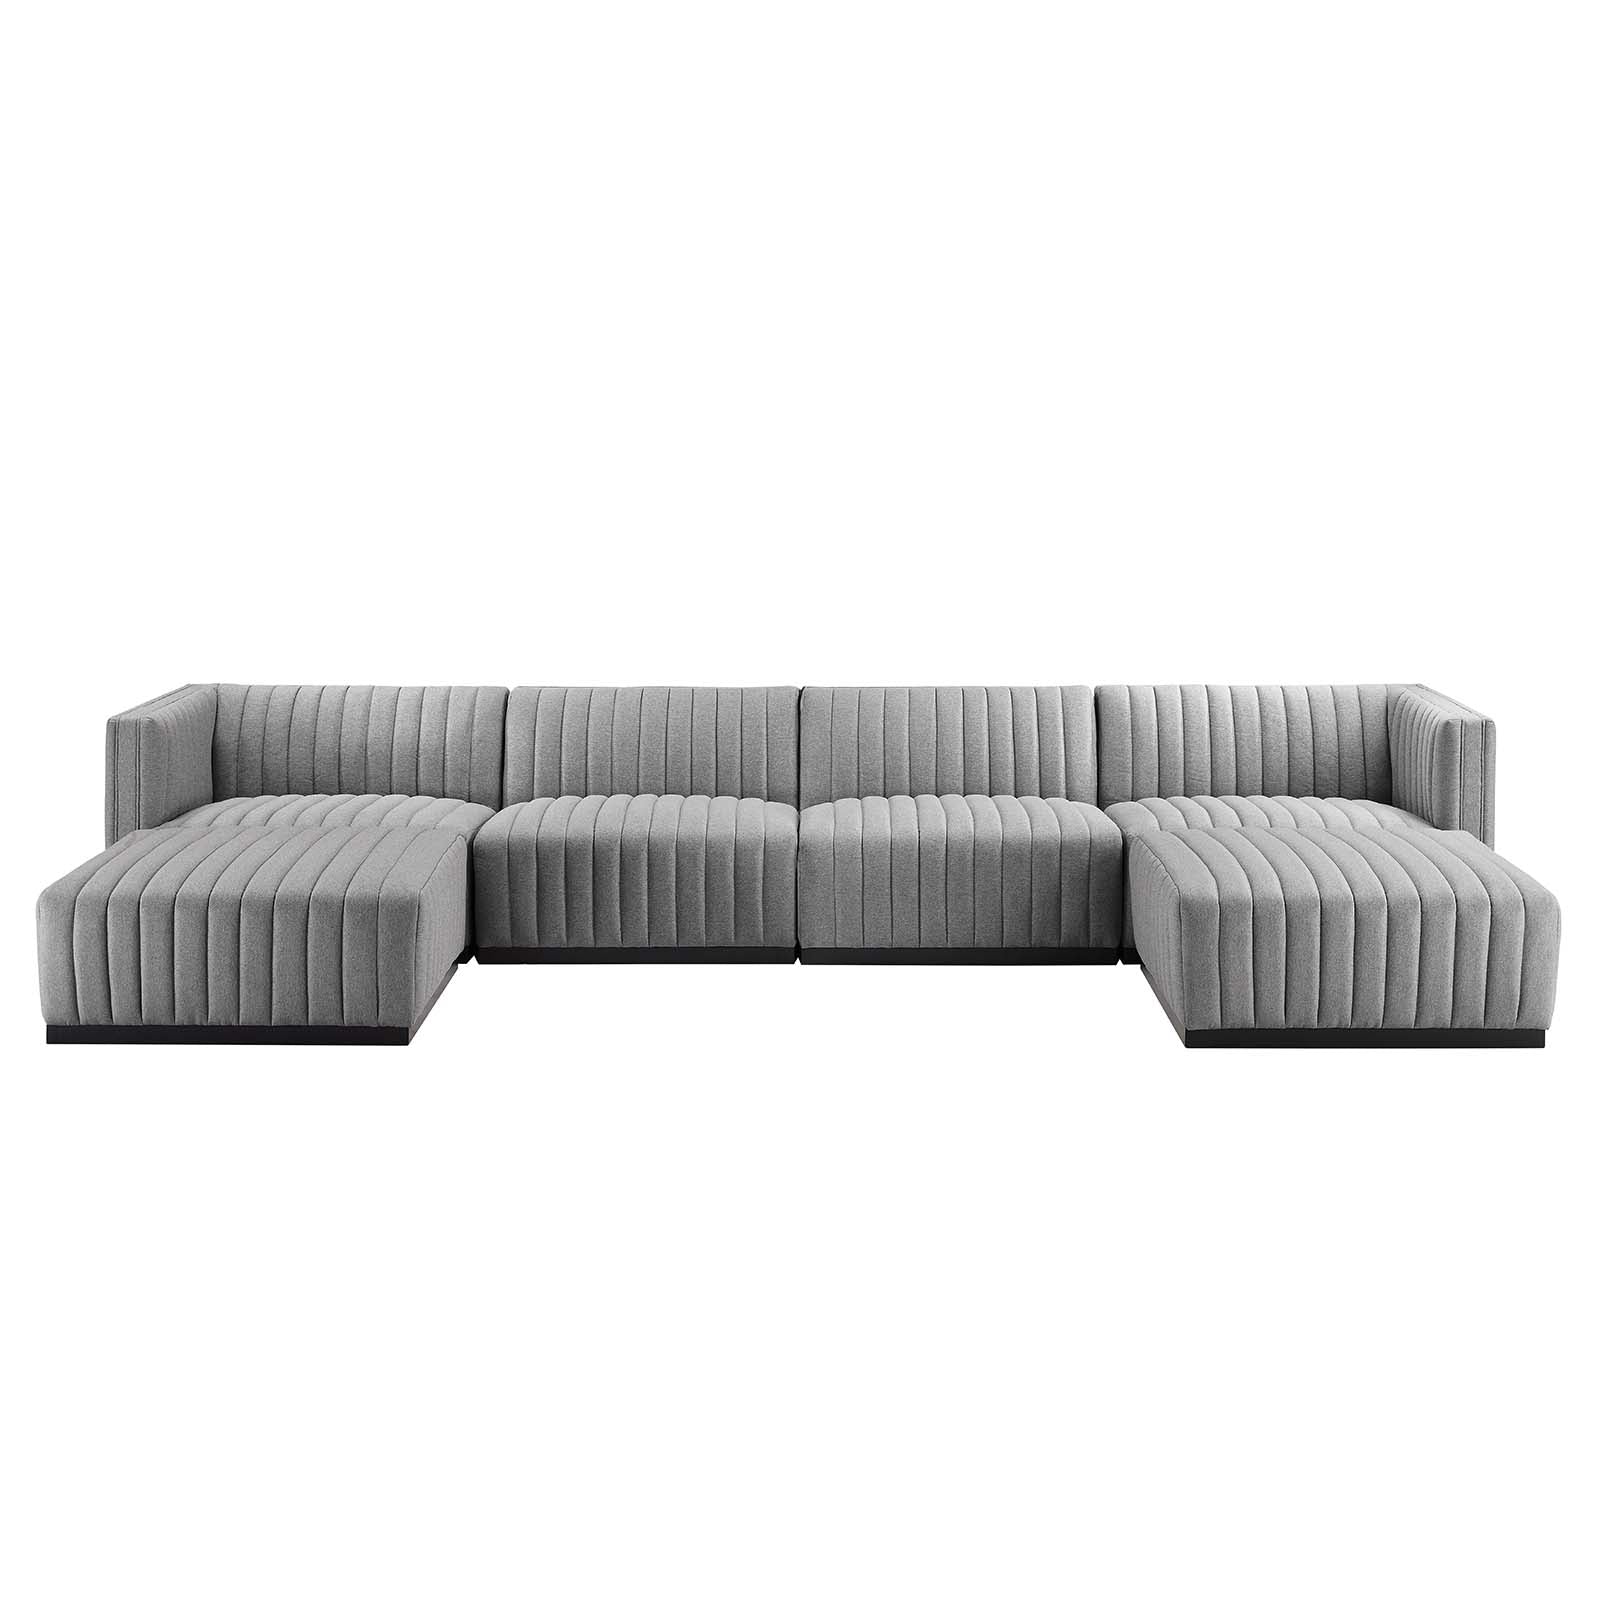 Modway Sectional Sofas - Conjure Channel Tufted Upholstered Fabric 6-Piece Sectional Sofa Black Light Gray